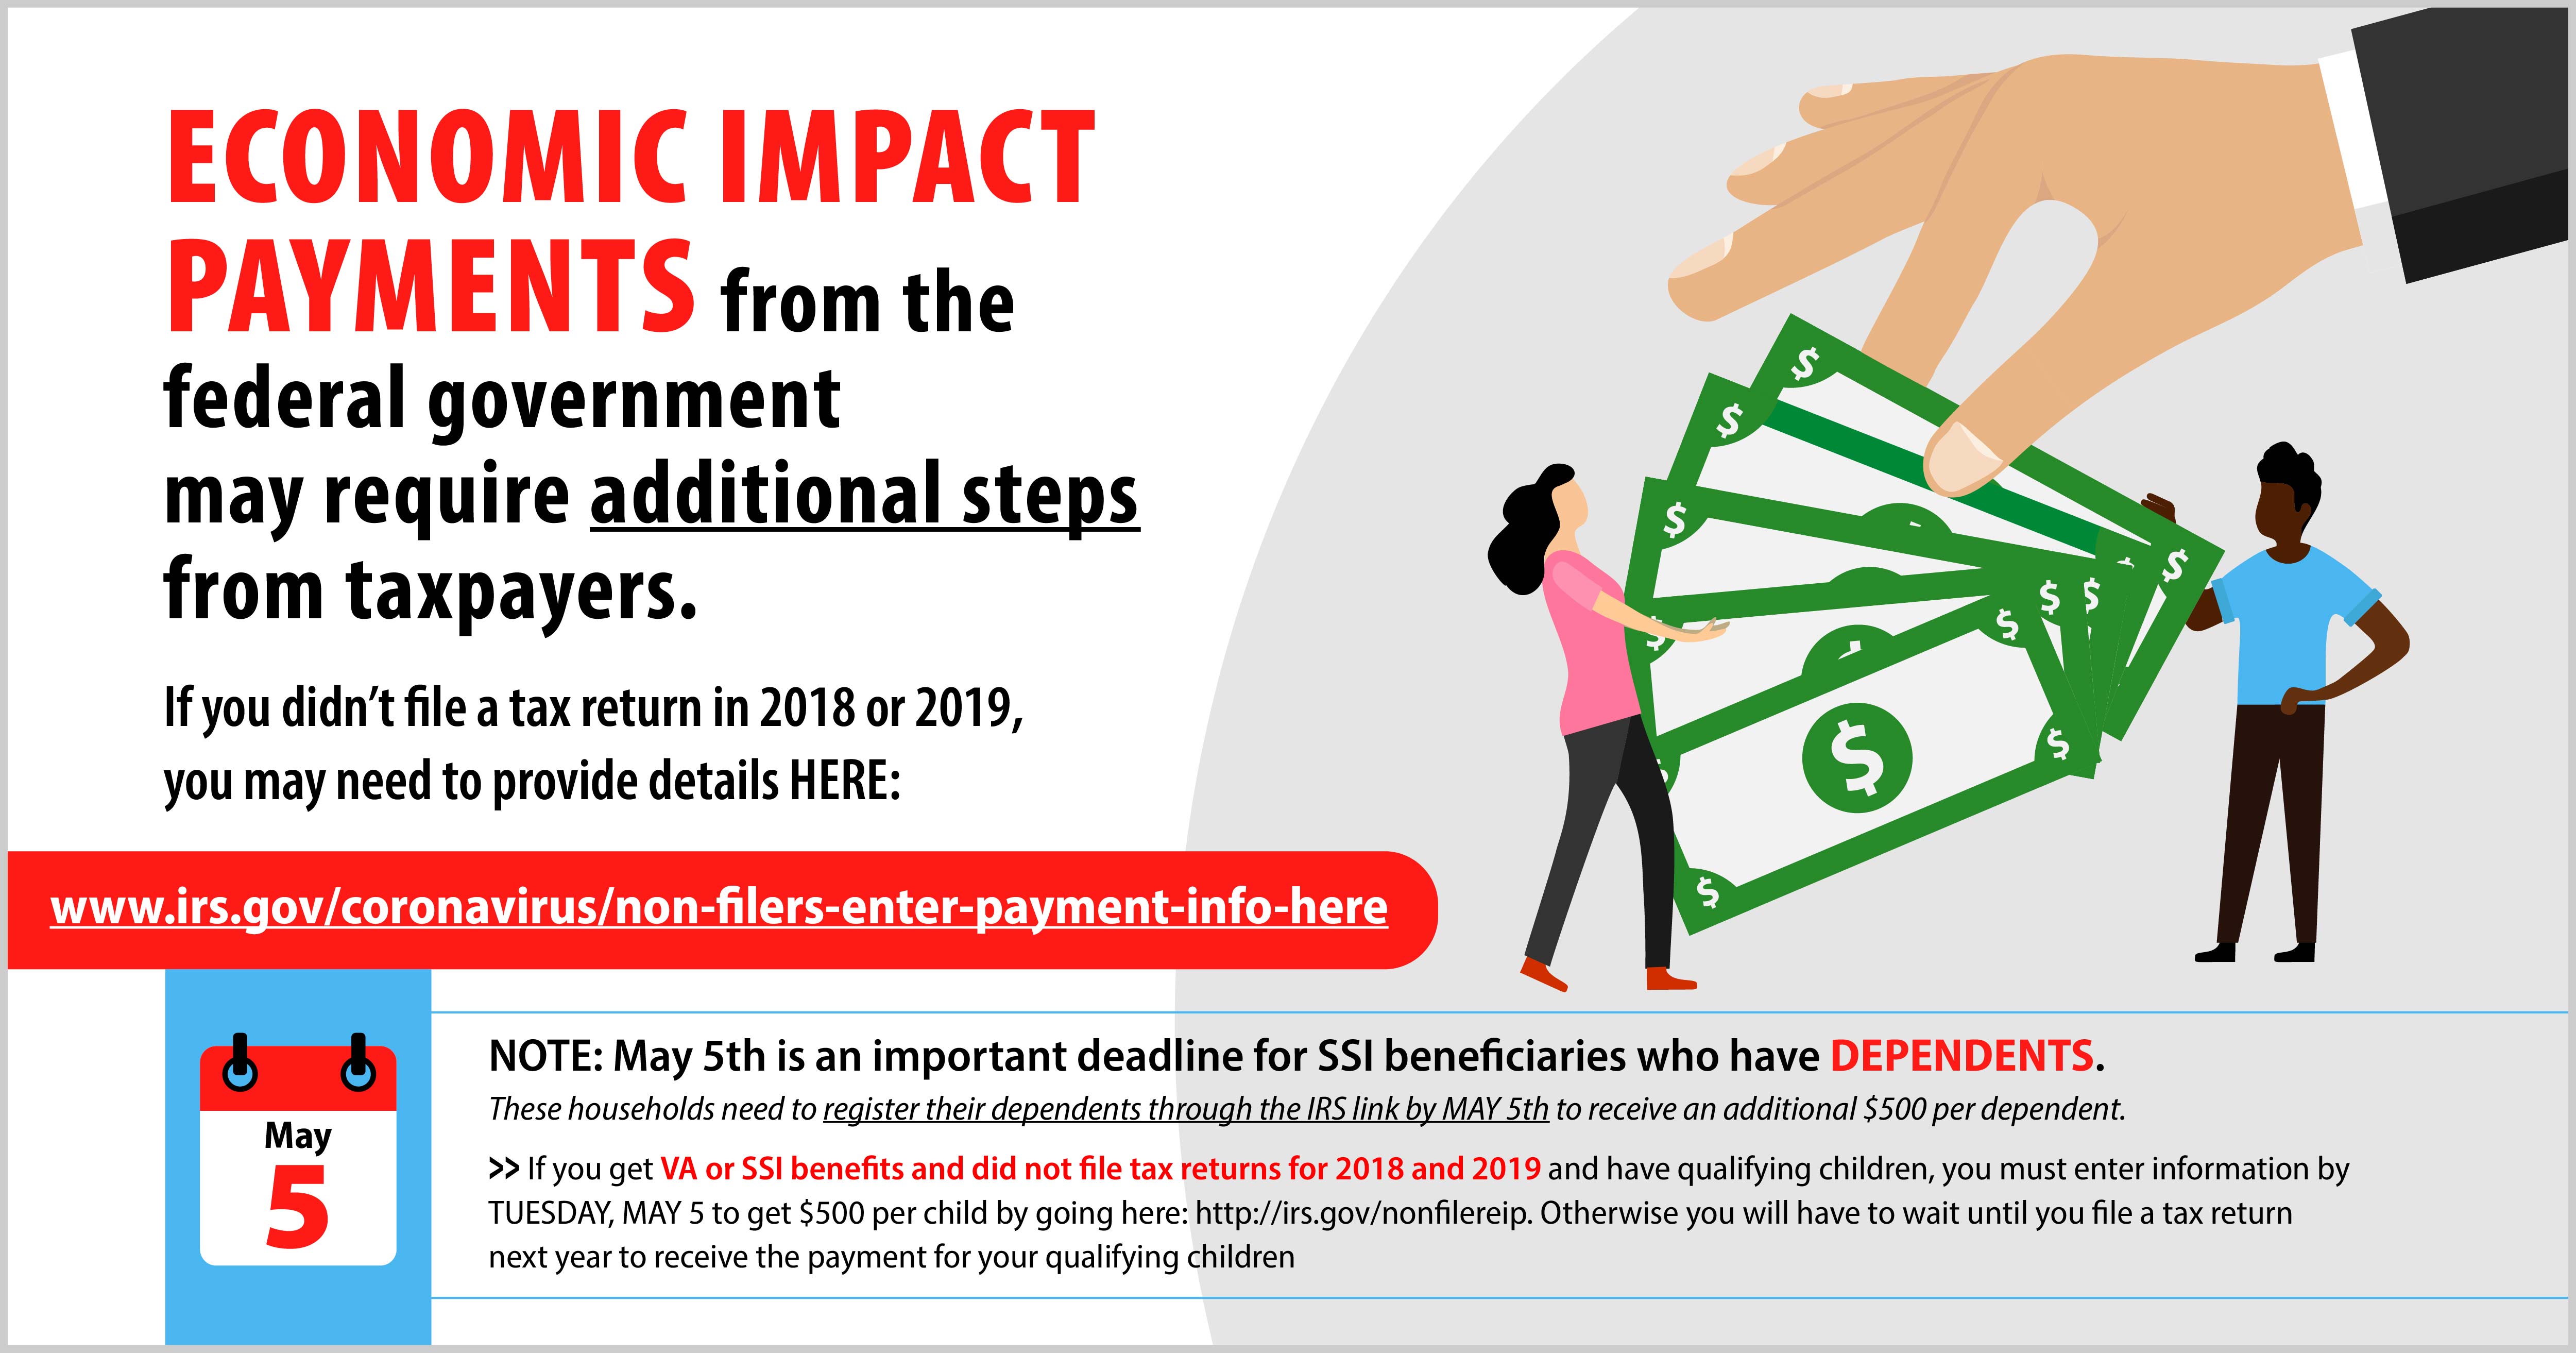 Economic Impact Payments deadline is May 5th